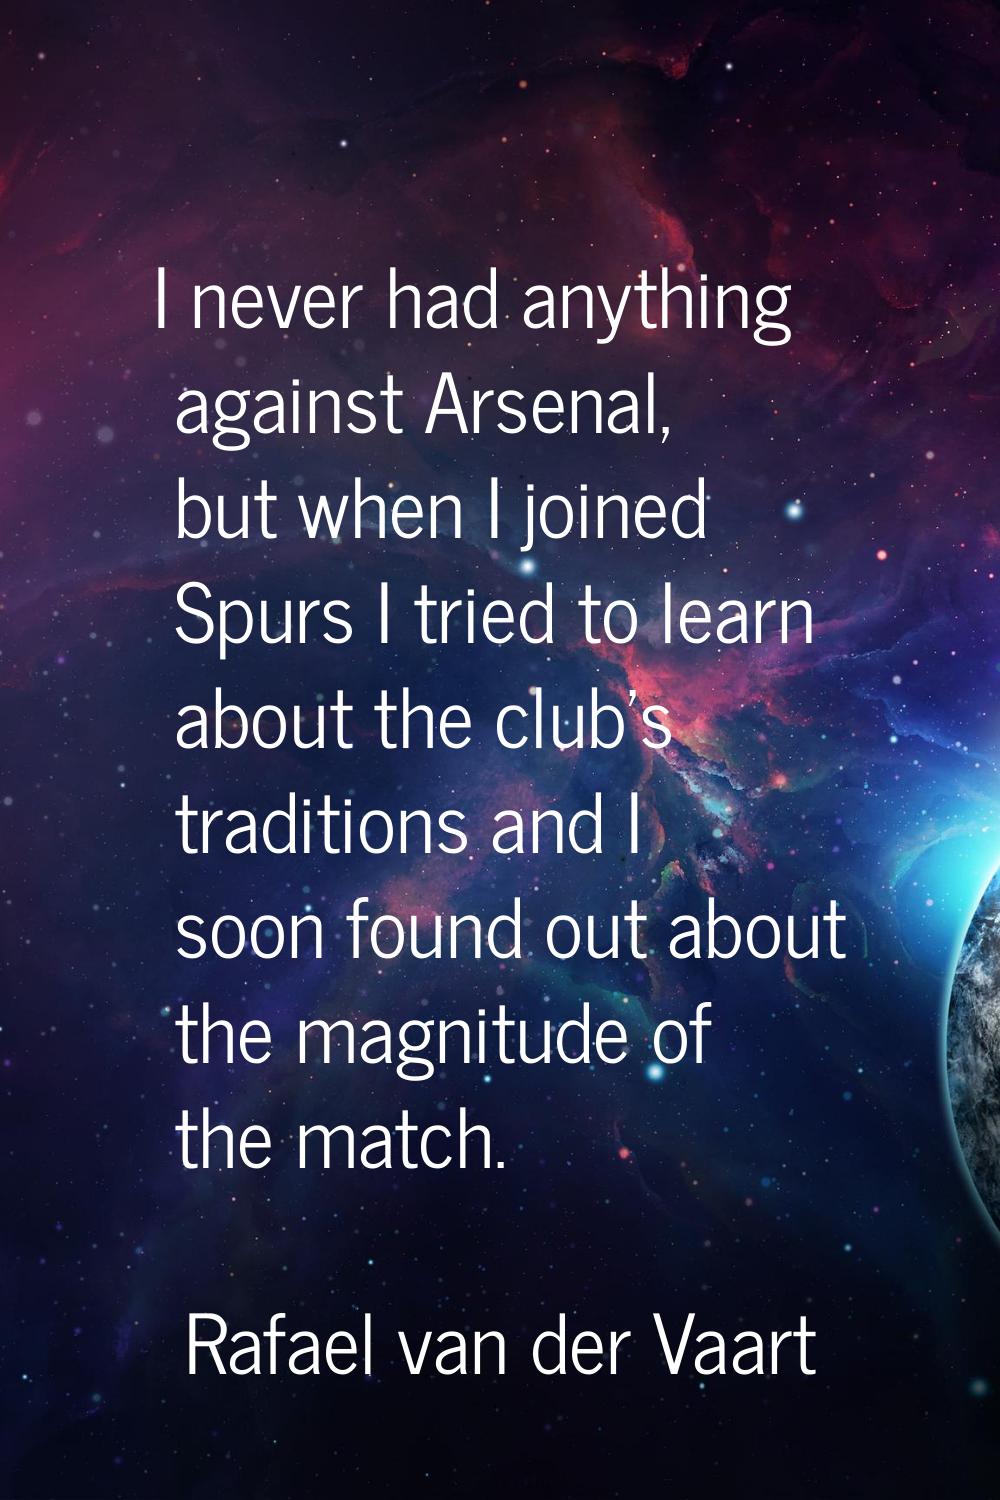 I never had anything against Arsenal, but when I joined Spurs I tried to learn about the club's tra